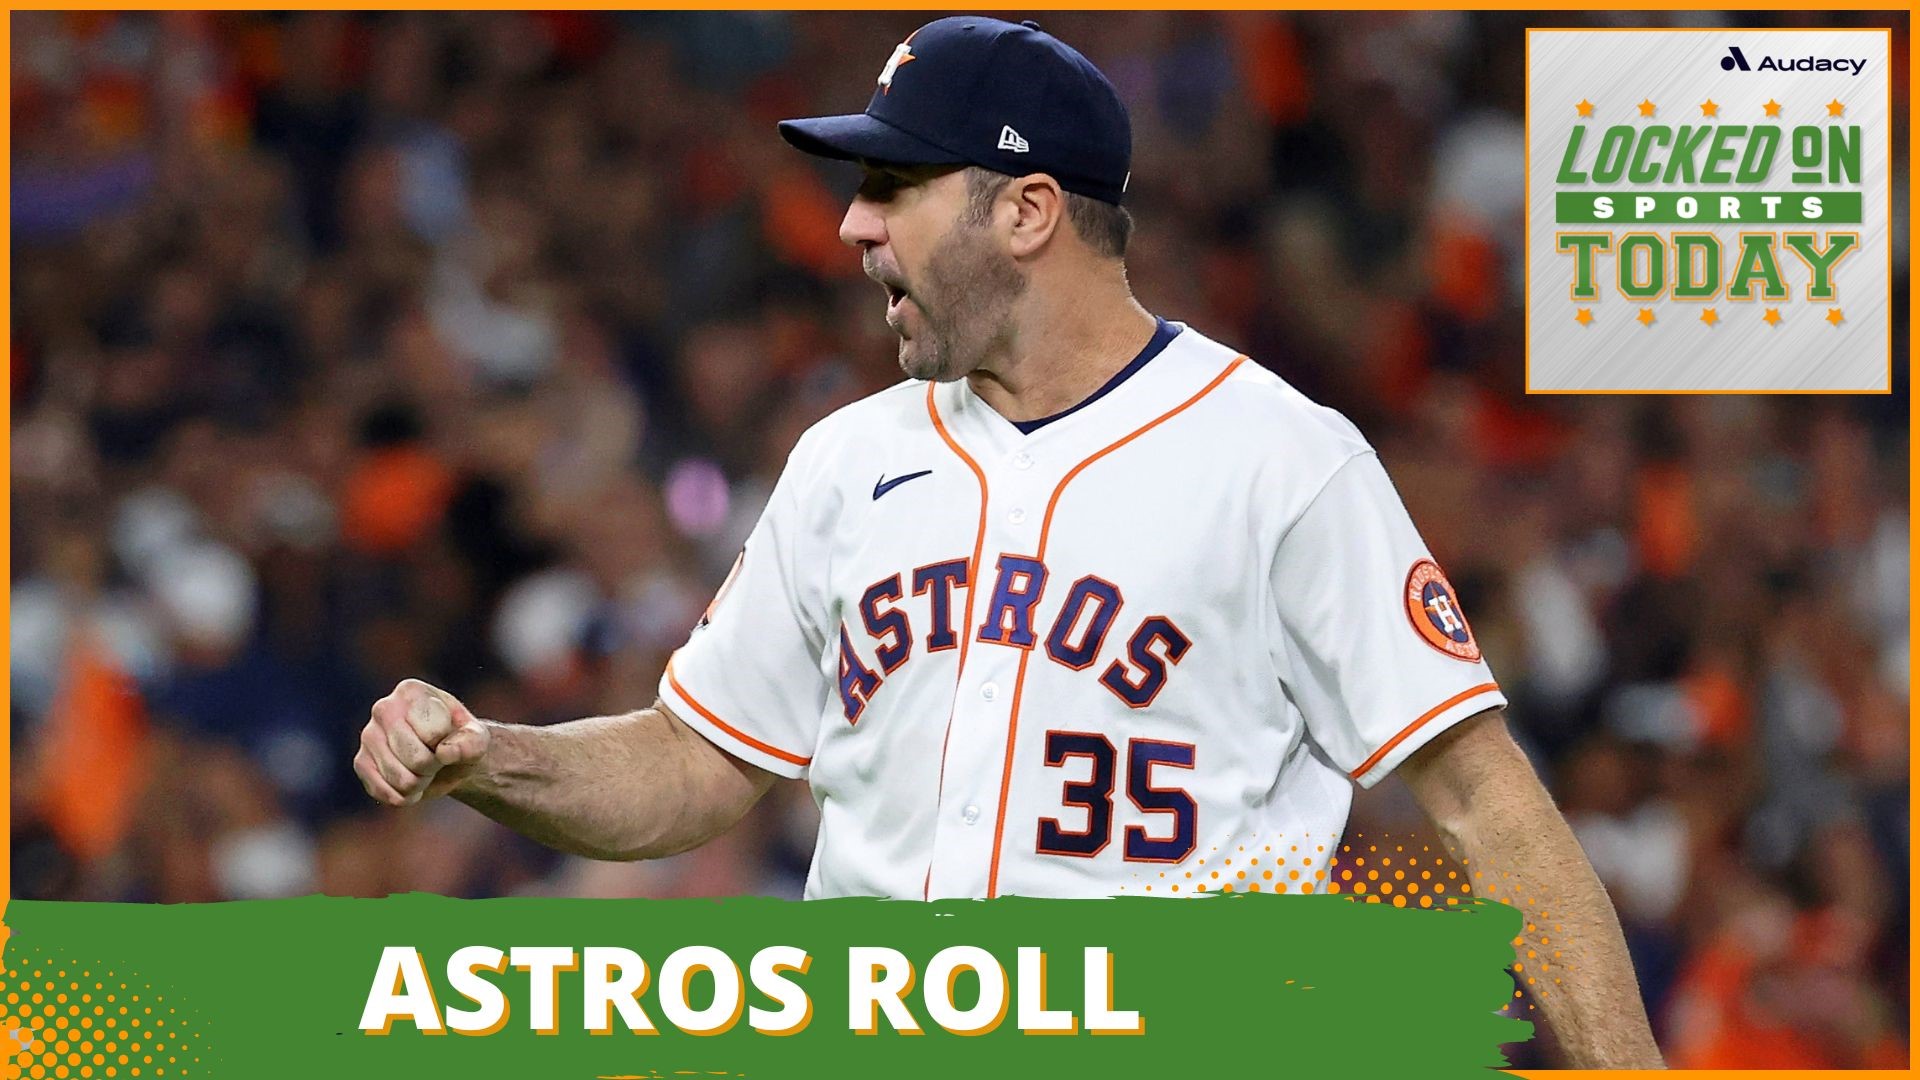 Discussing the day's top sports stories from the Padres evening out the series with the Phillies to the Astros taking game 1 over the Yankees.